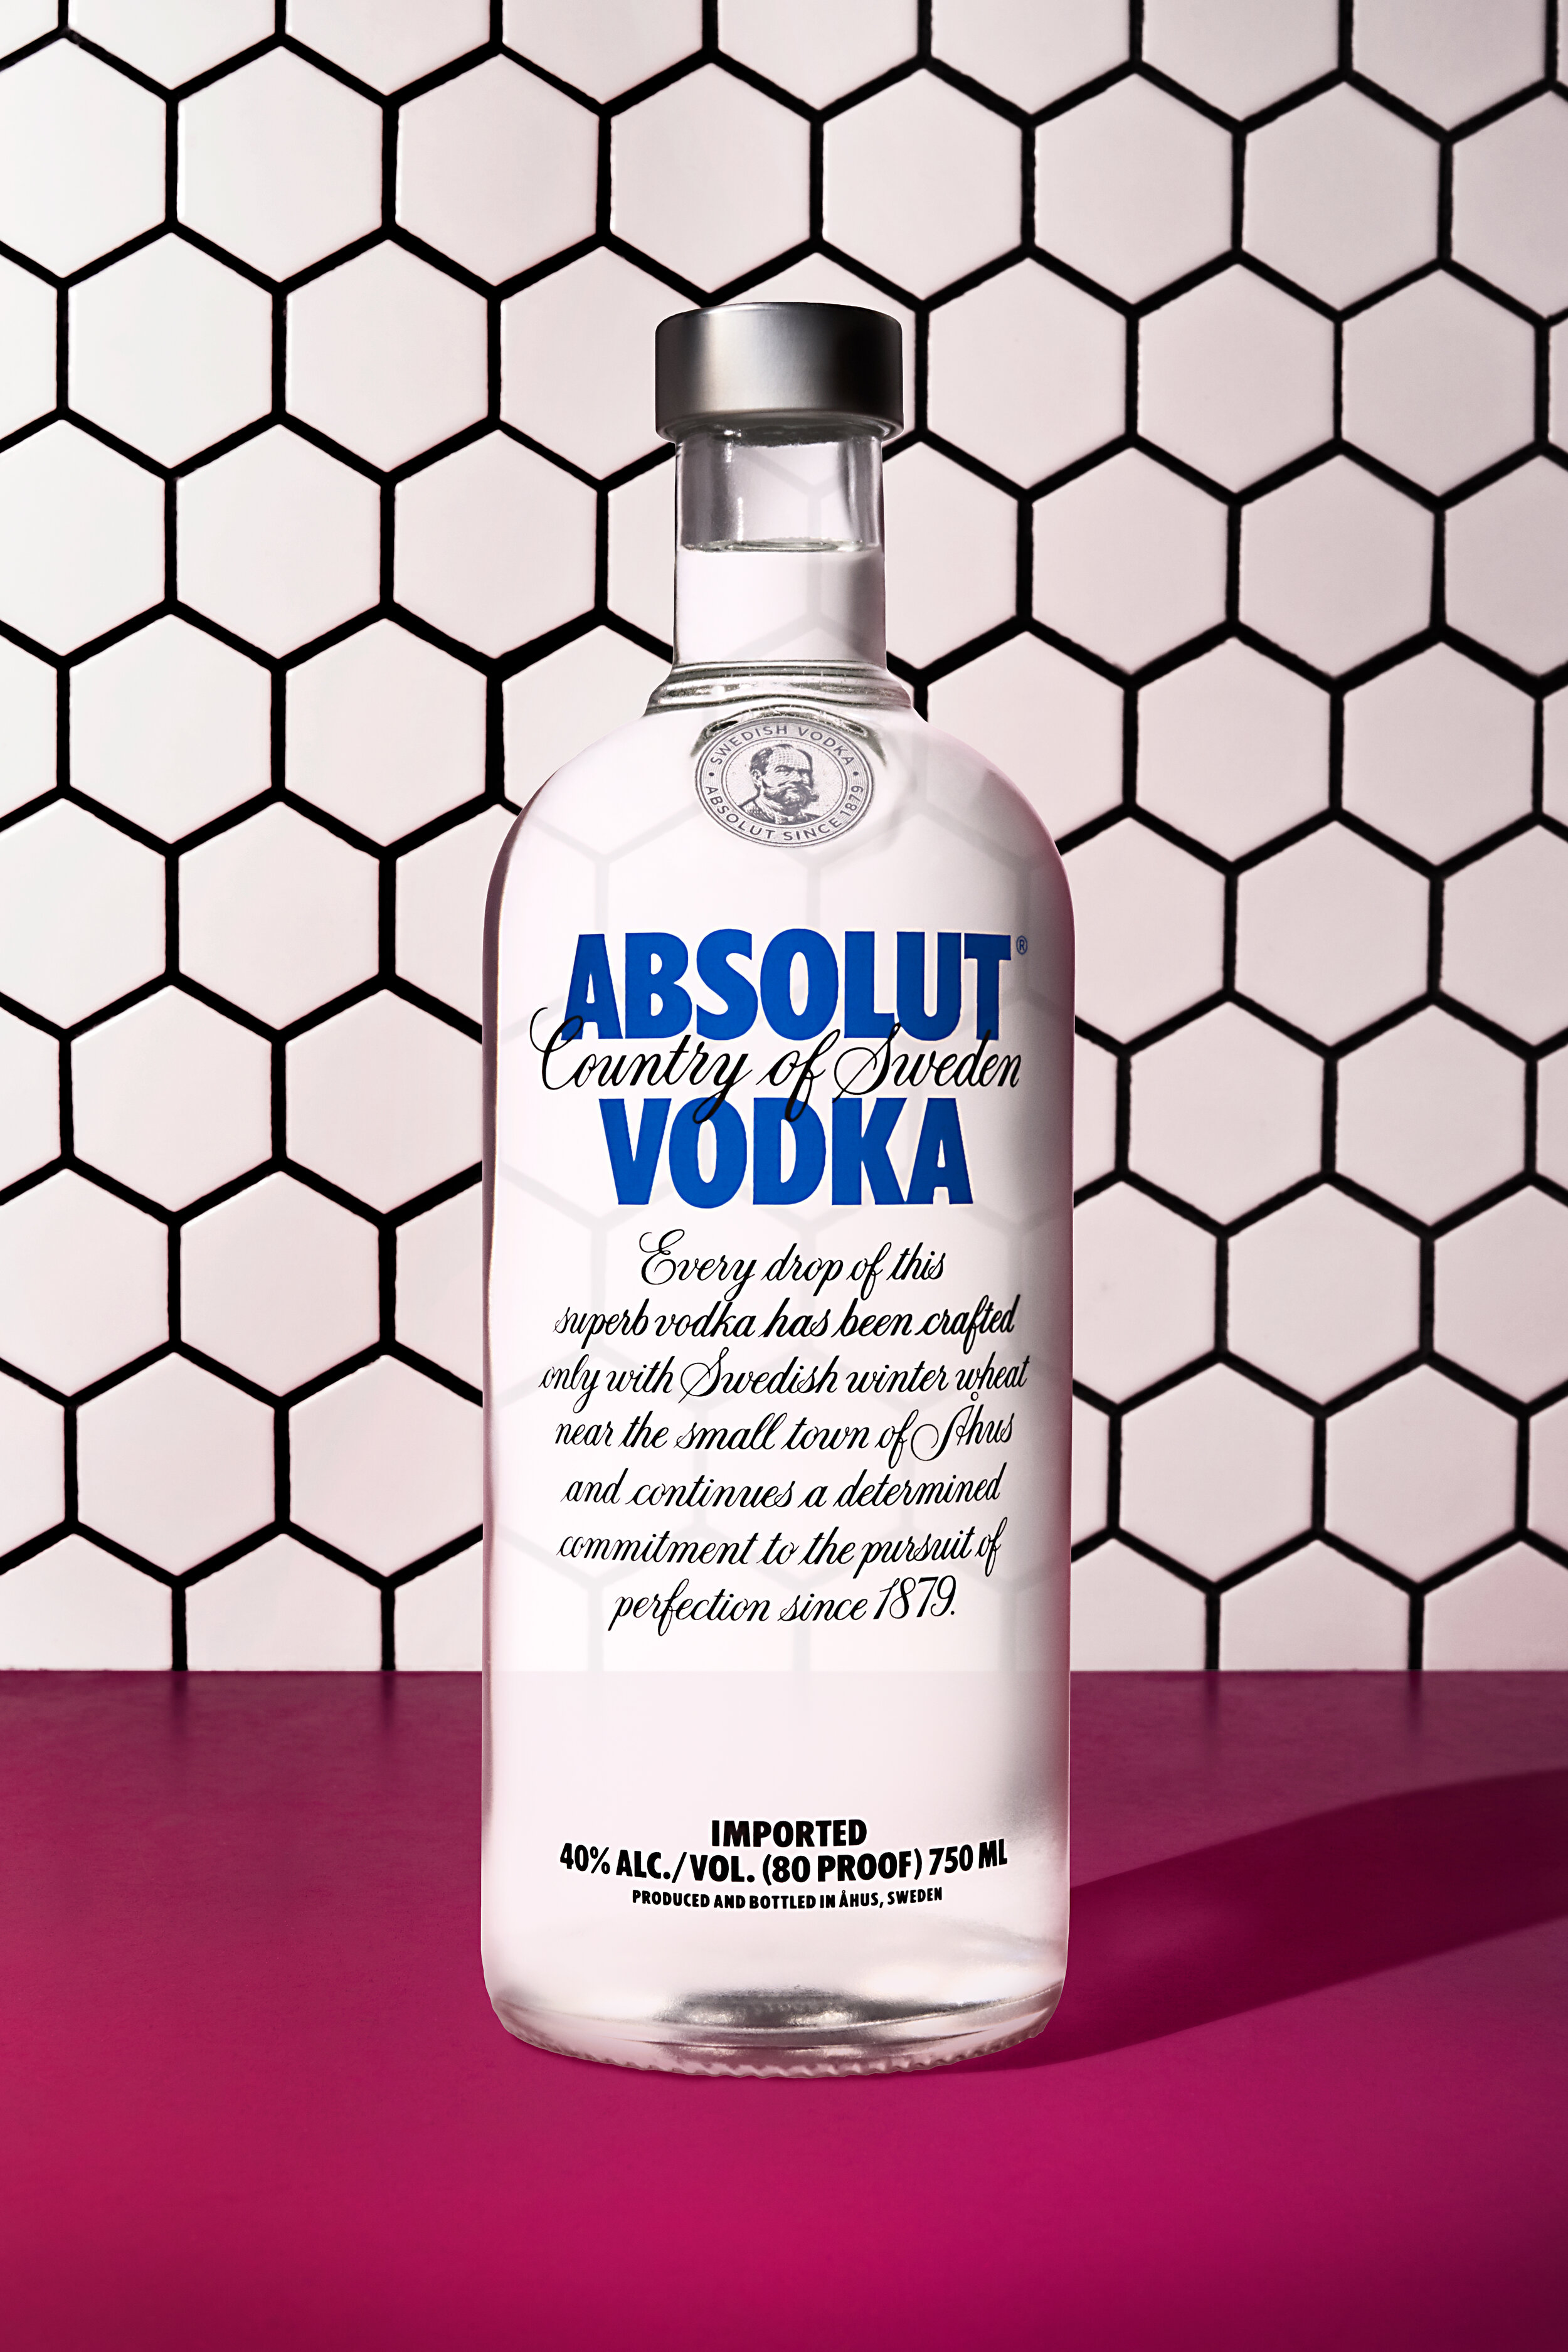 AbsolutVodkaTile_with Transparency.jpg